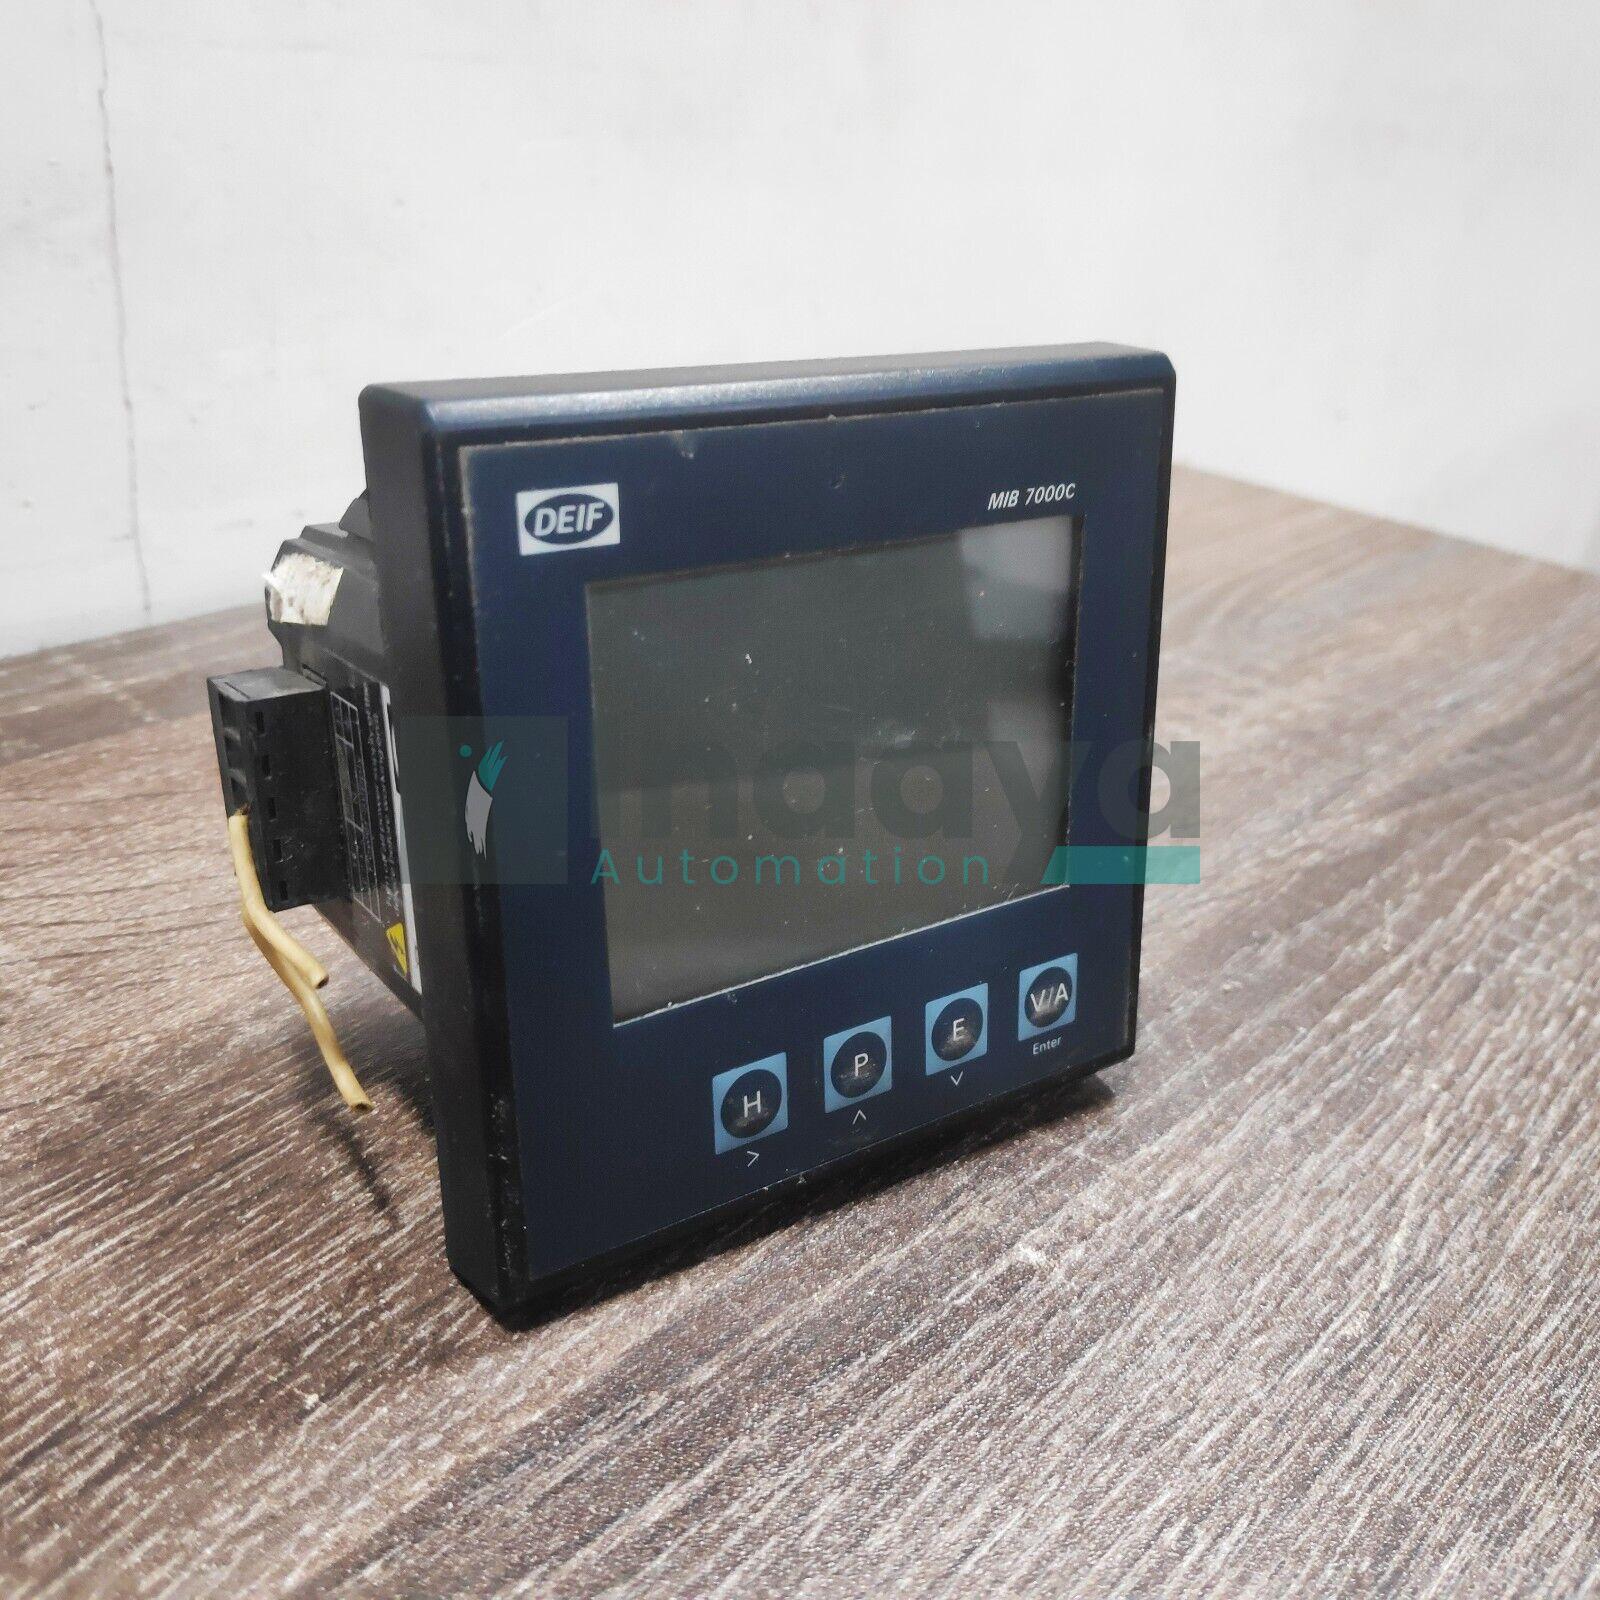 DEIF MIB 7000C multi-instrument for measurements and monitoring